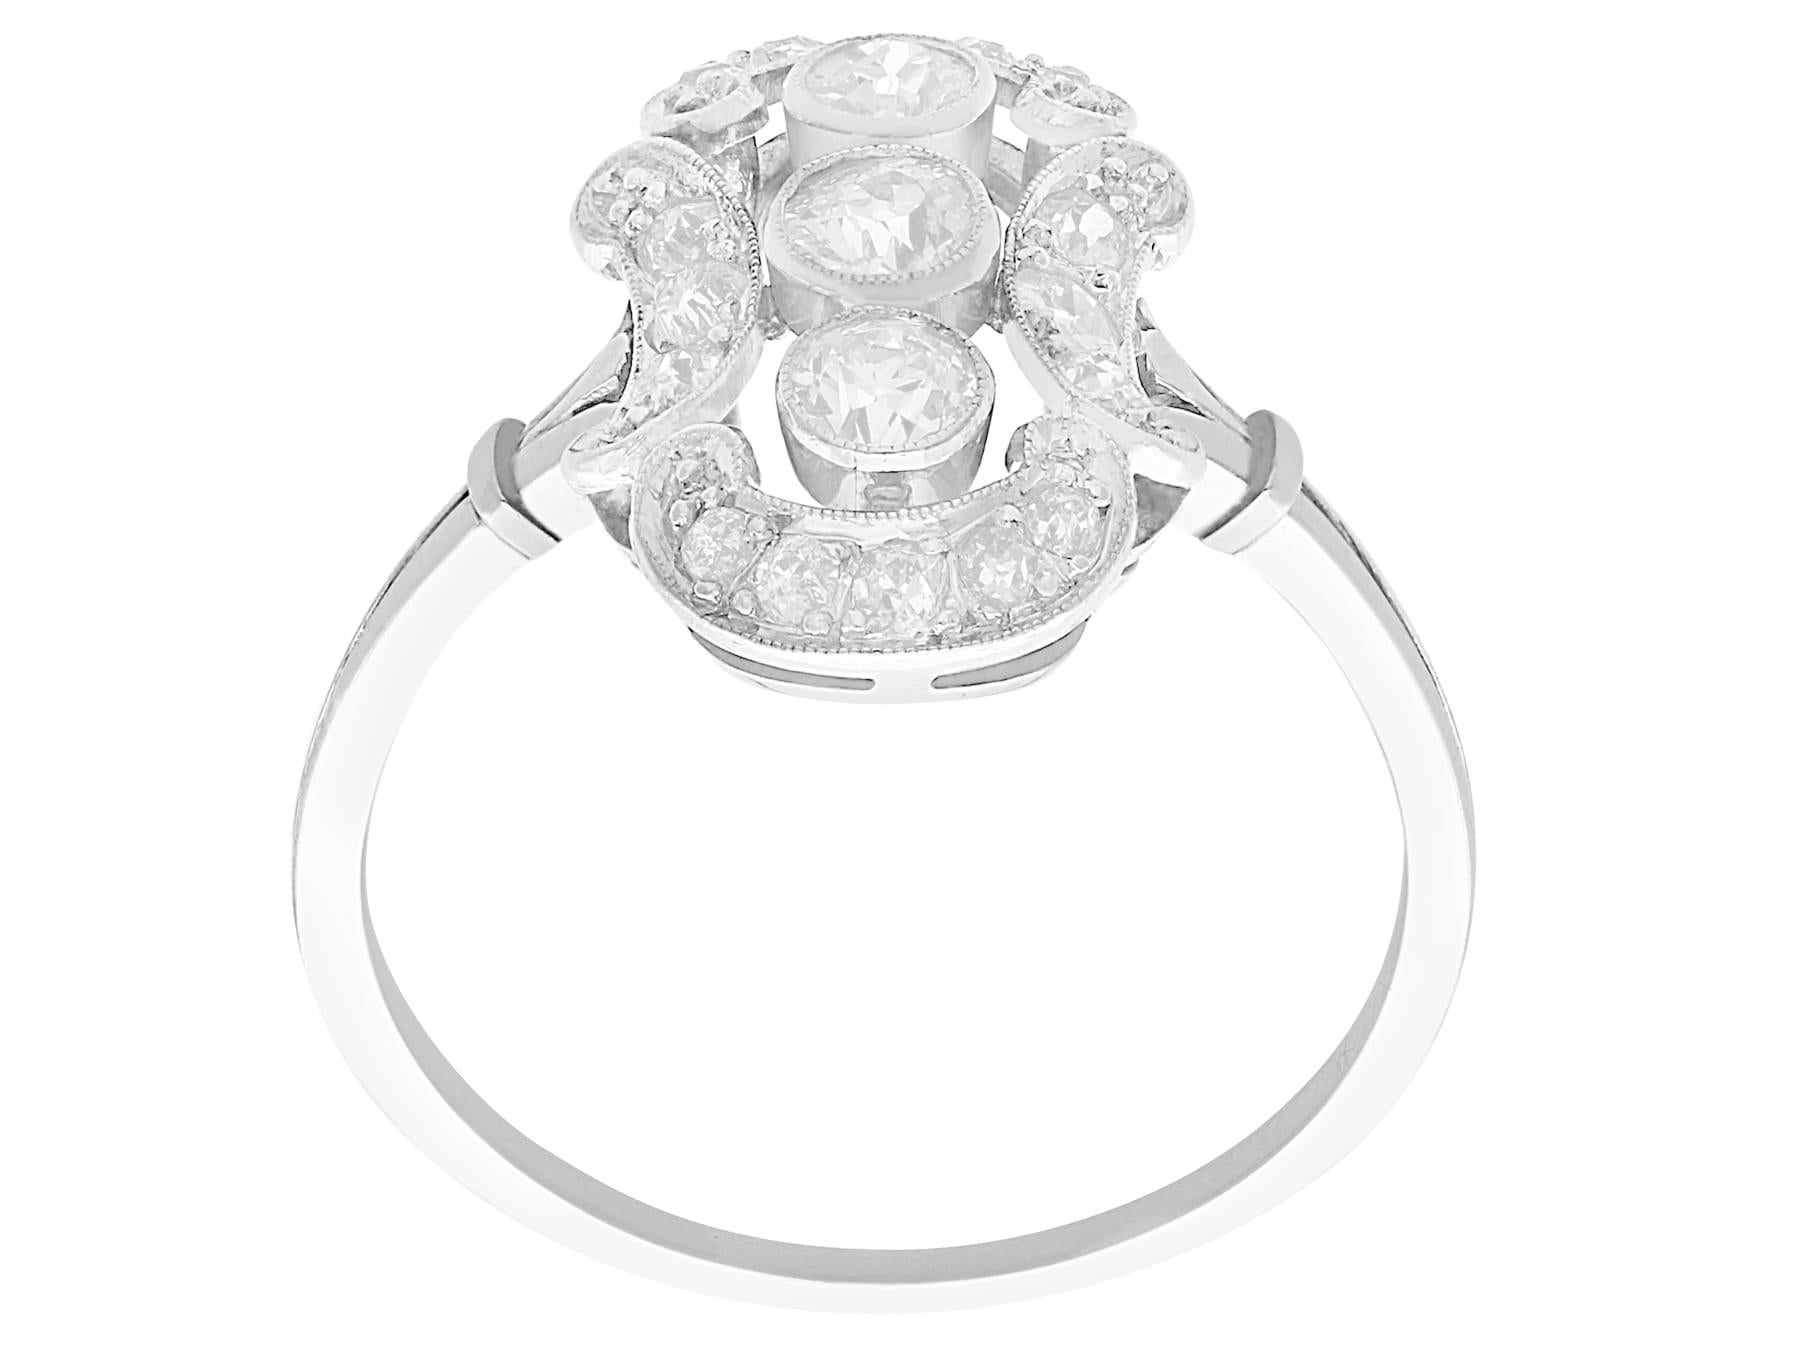 1920s Diamond White Gold Cocktail Ring In Excellent Condition For Sale In Jesmond, Newcastle Upon Tyne